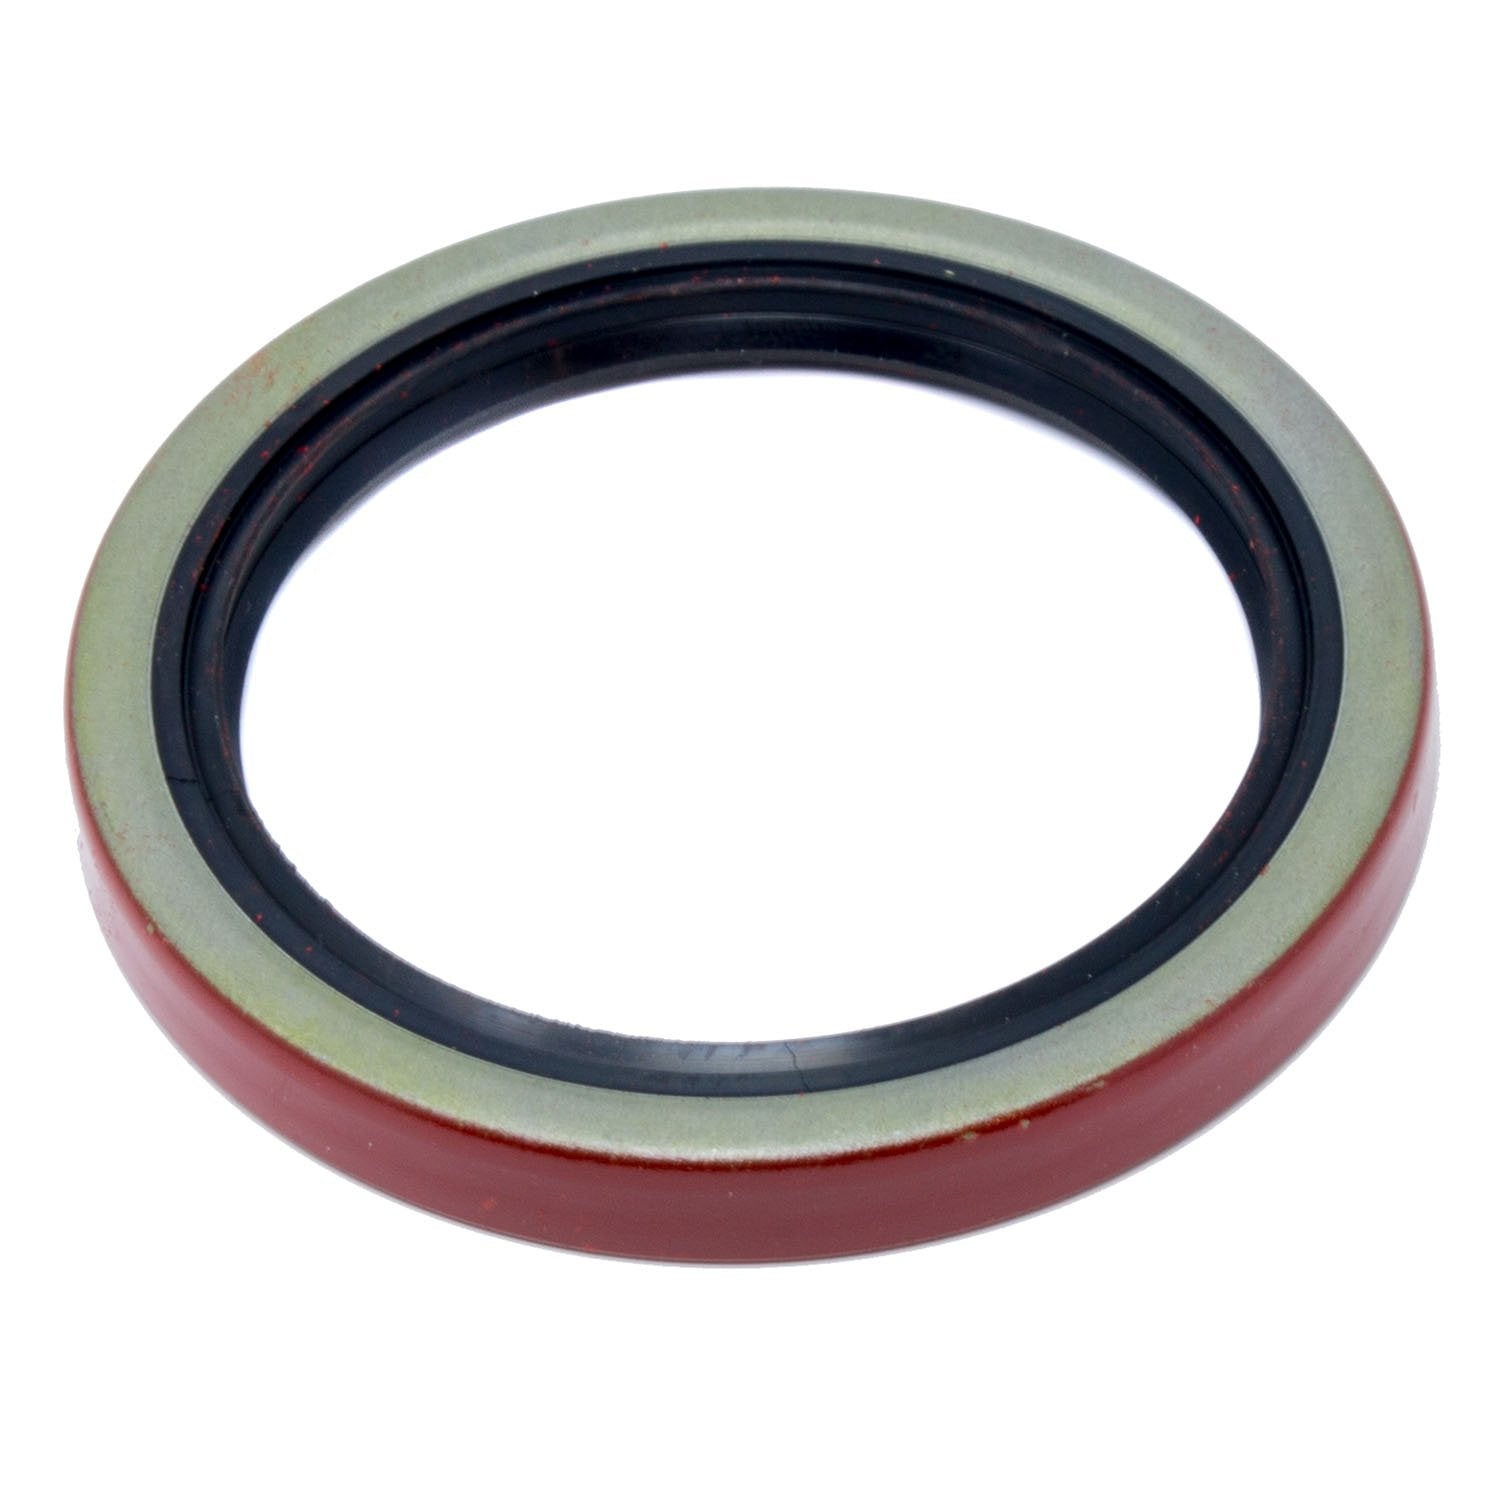 Duraforce 7231090, Axle Oil Seal For Bobcat